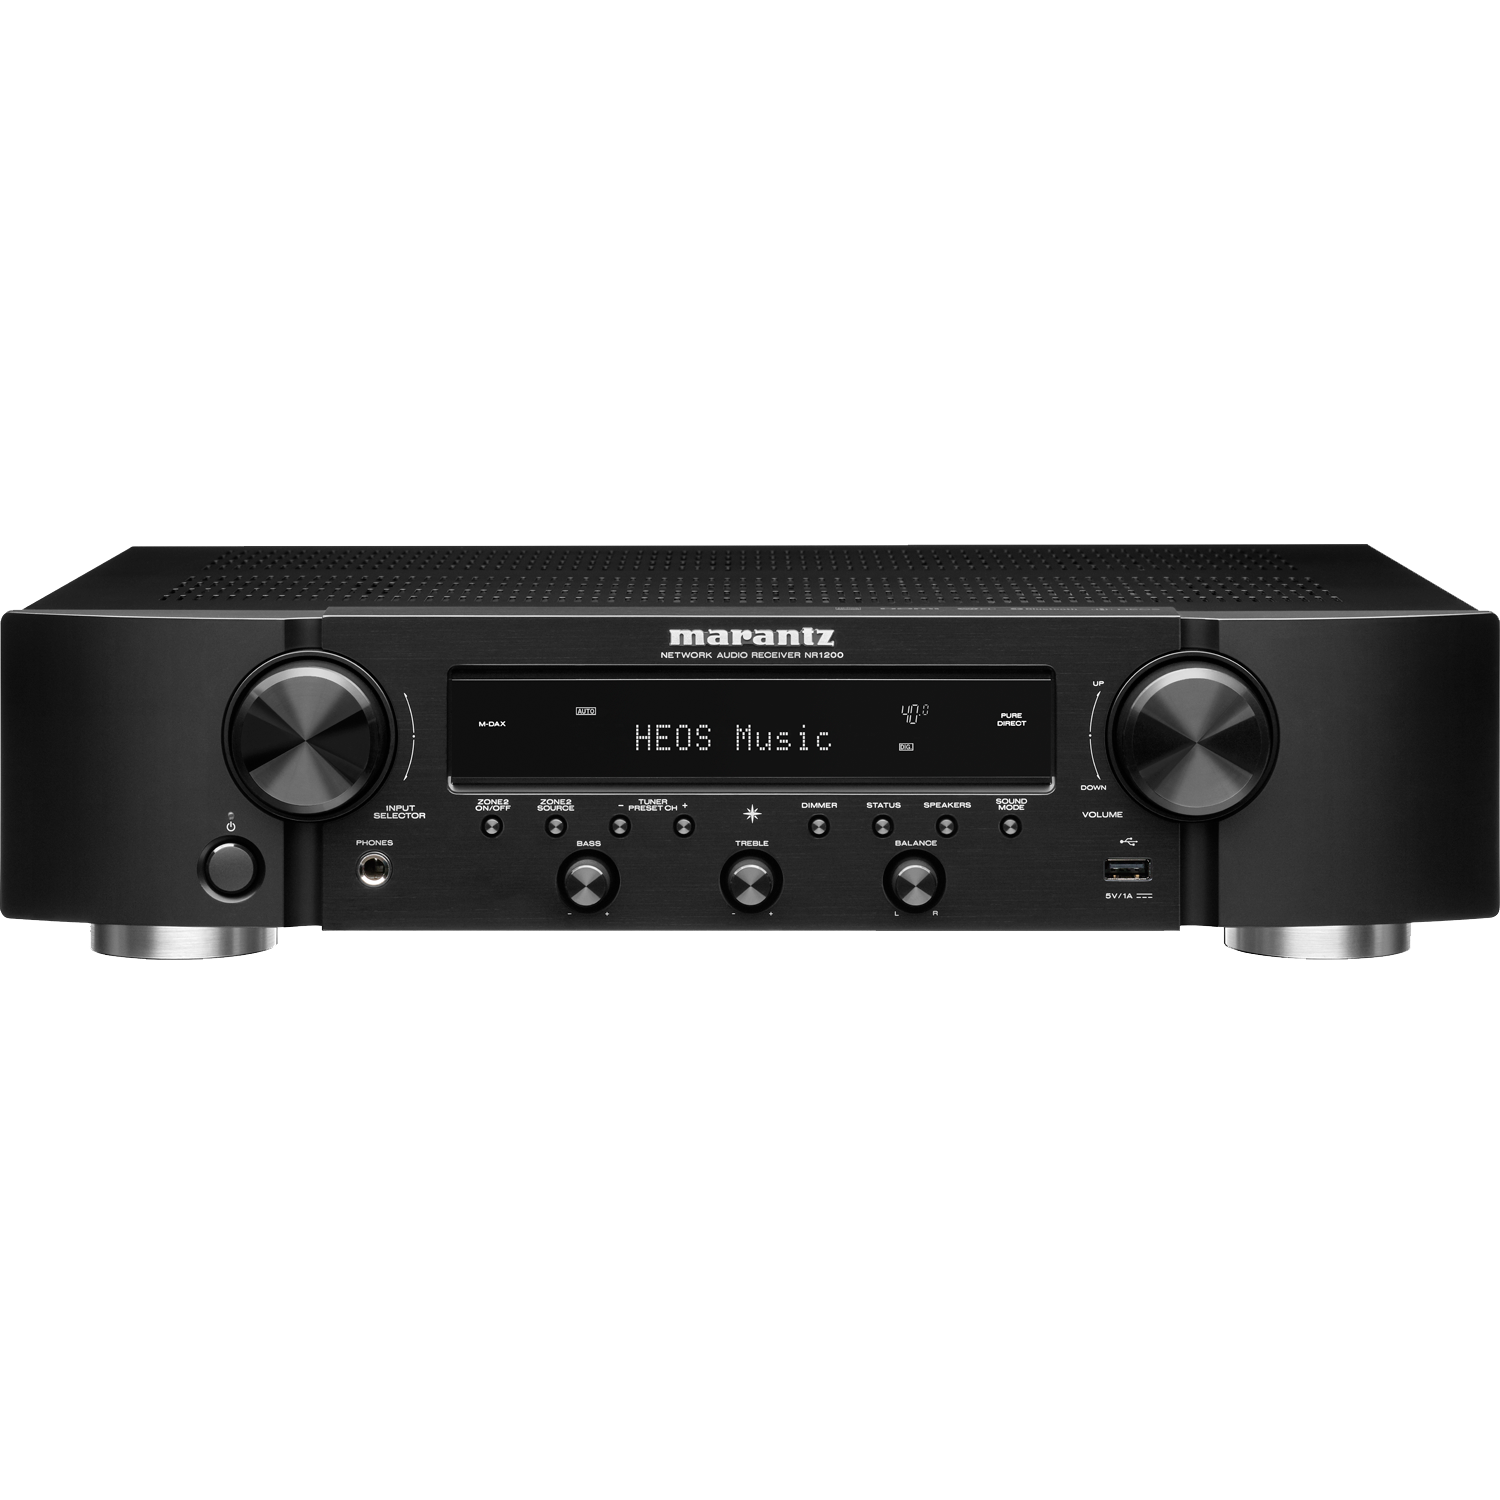 Yamaha R-S202, 2 Channel Stereo Receiver - R-S202BL